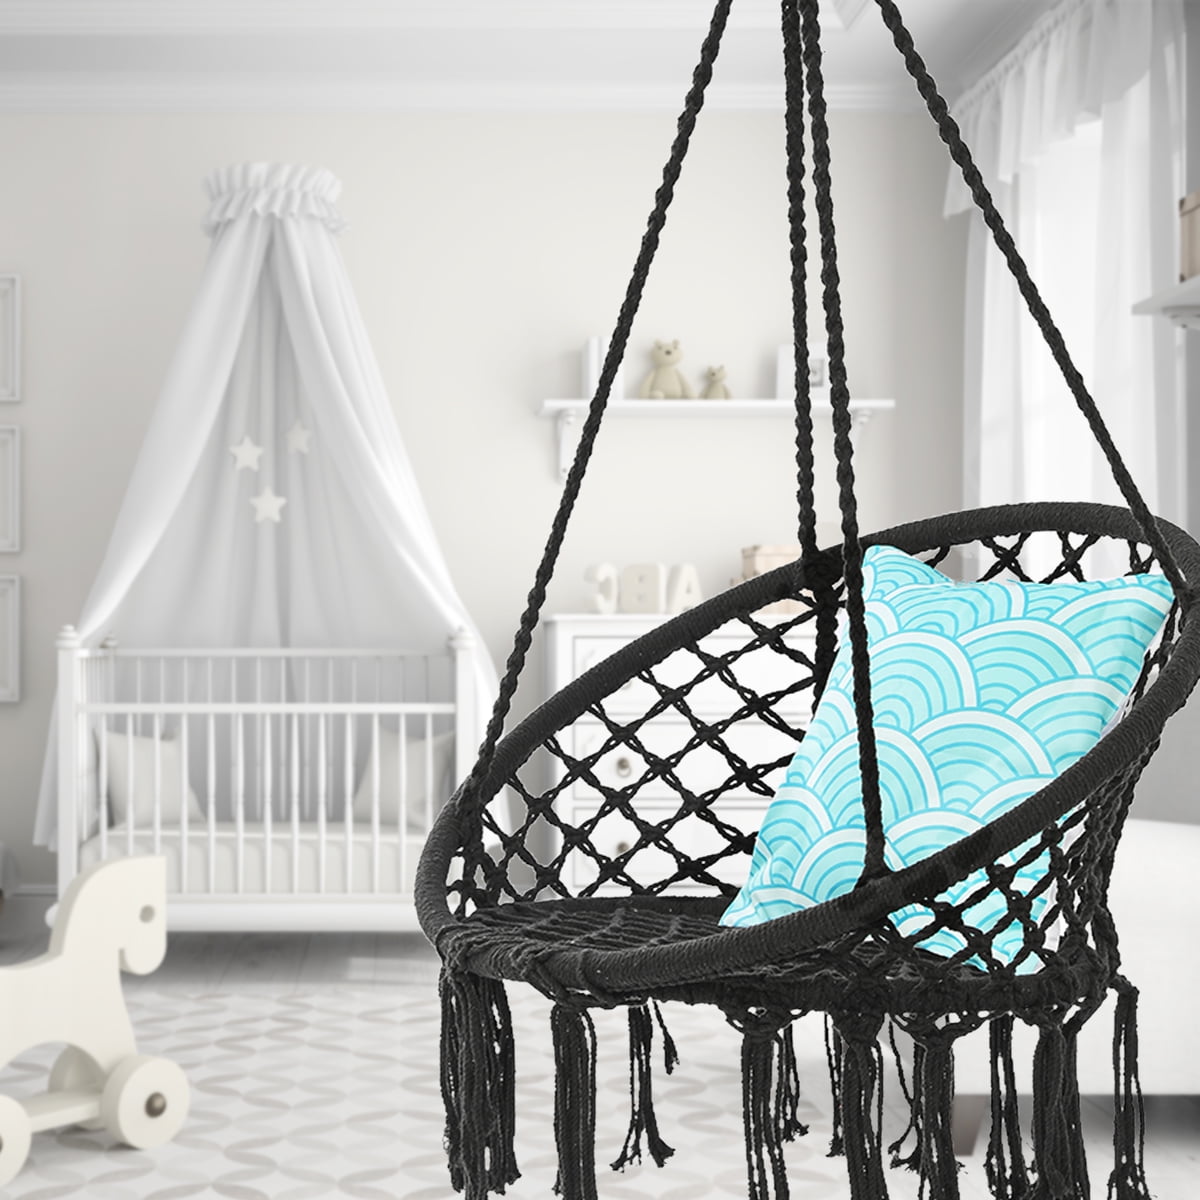 KWANSHOP Hanging Hammock Chair Macrame Swing Seat Mesh, Handmade Knitted  Hanging Cotton Rope Chair for Indoor/Outdoor Home Patio Garden Back Yard,  